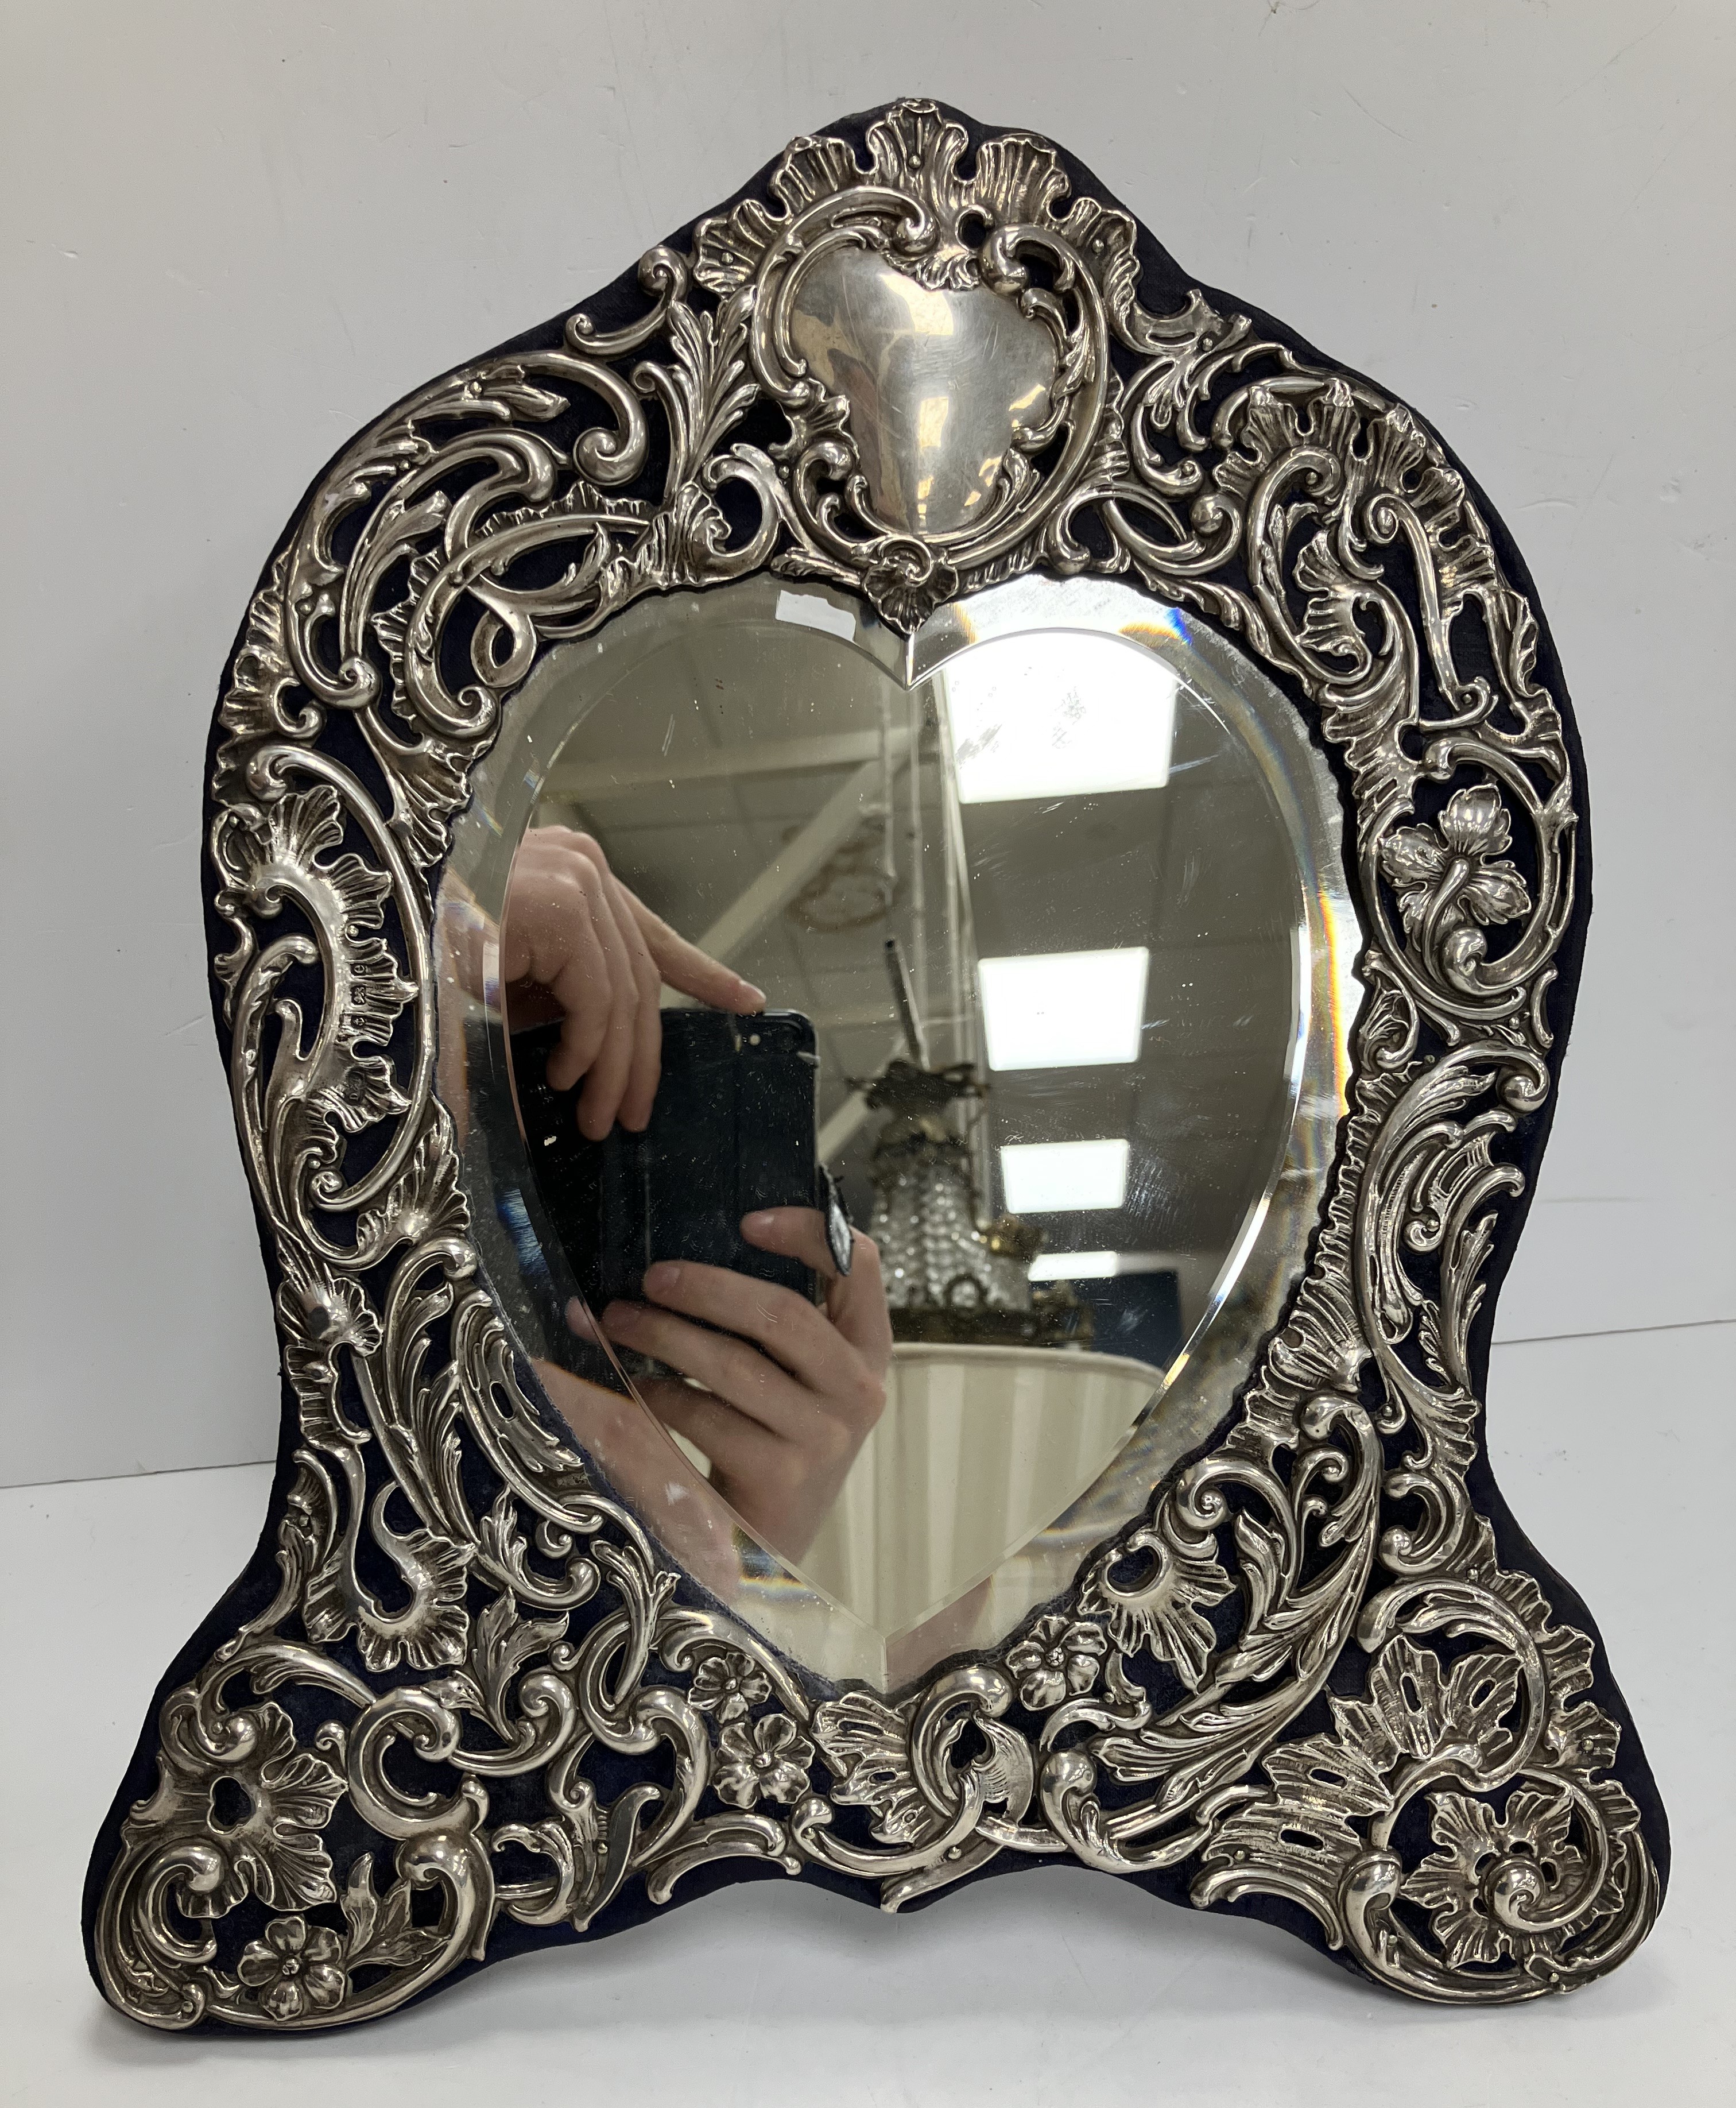 An Edwardian pierced and embossed silver embellished easel mirror with central bevel edged love